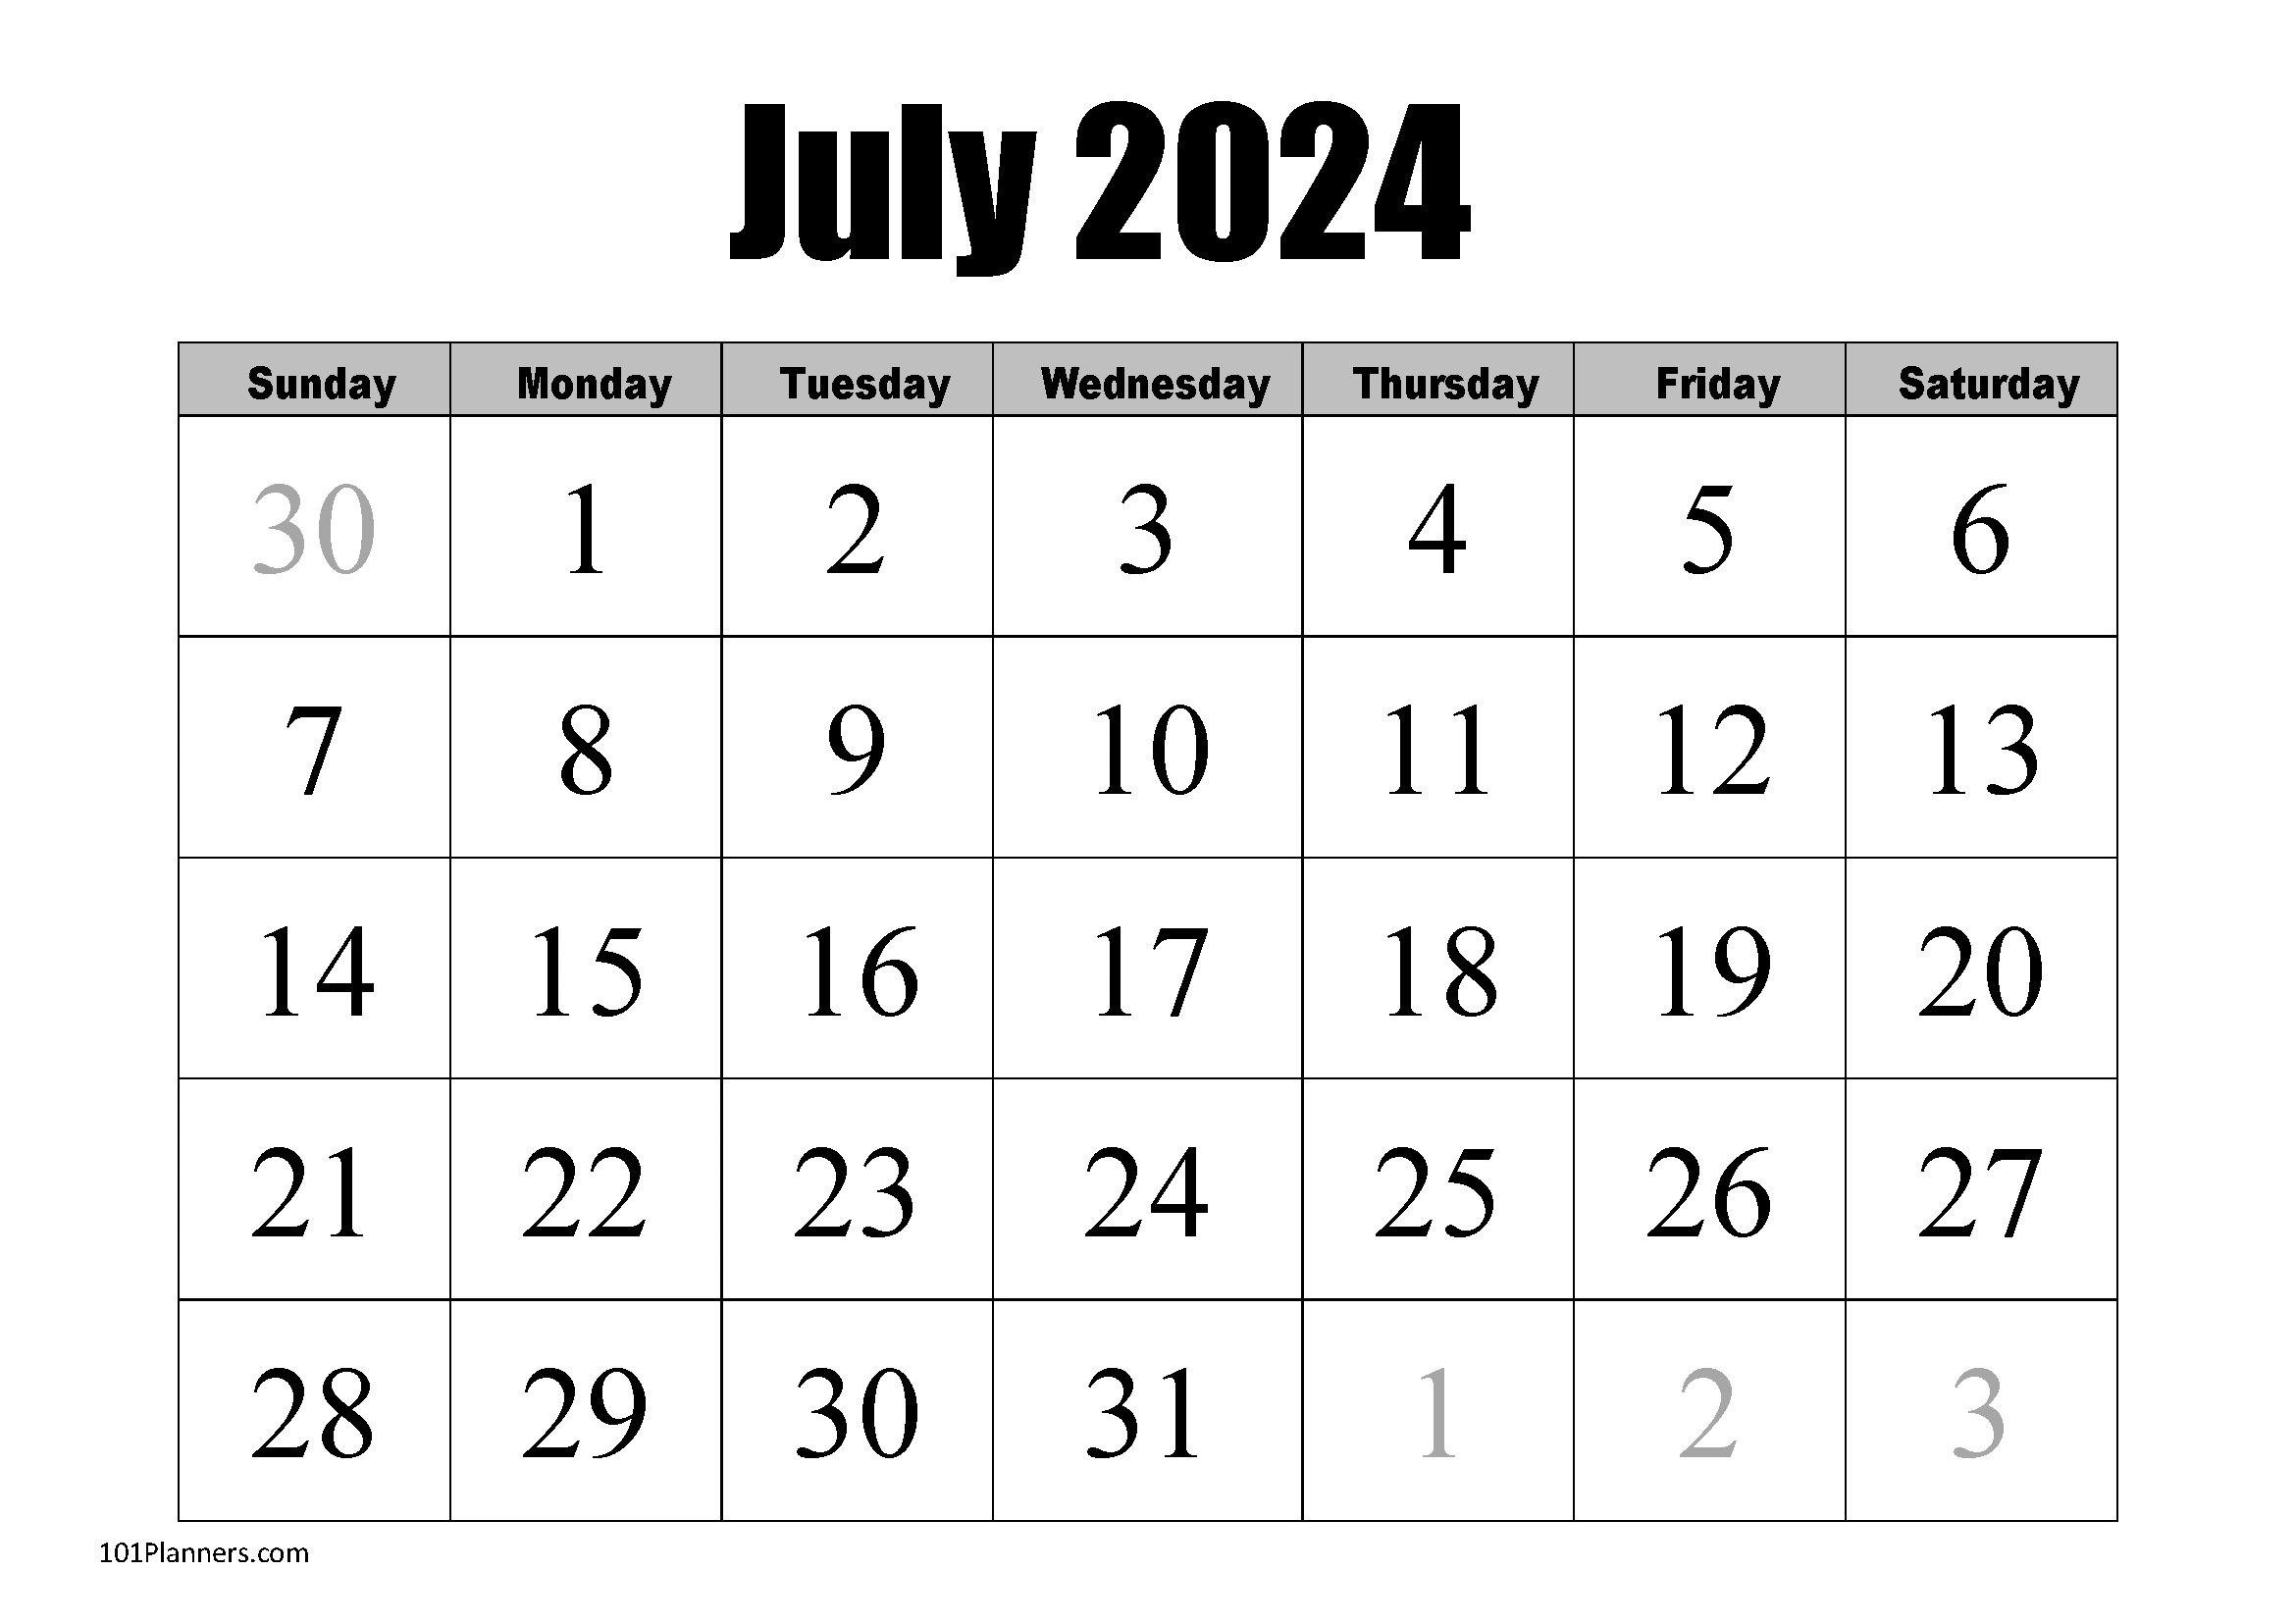 Free Printable July 2024 Calendar | Customize Online intended for 28th July 2024 Calendar Printable